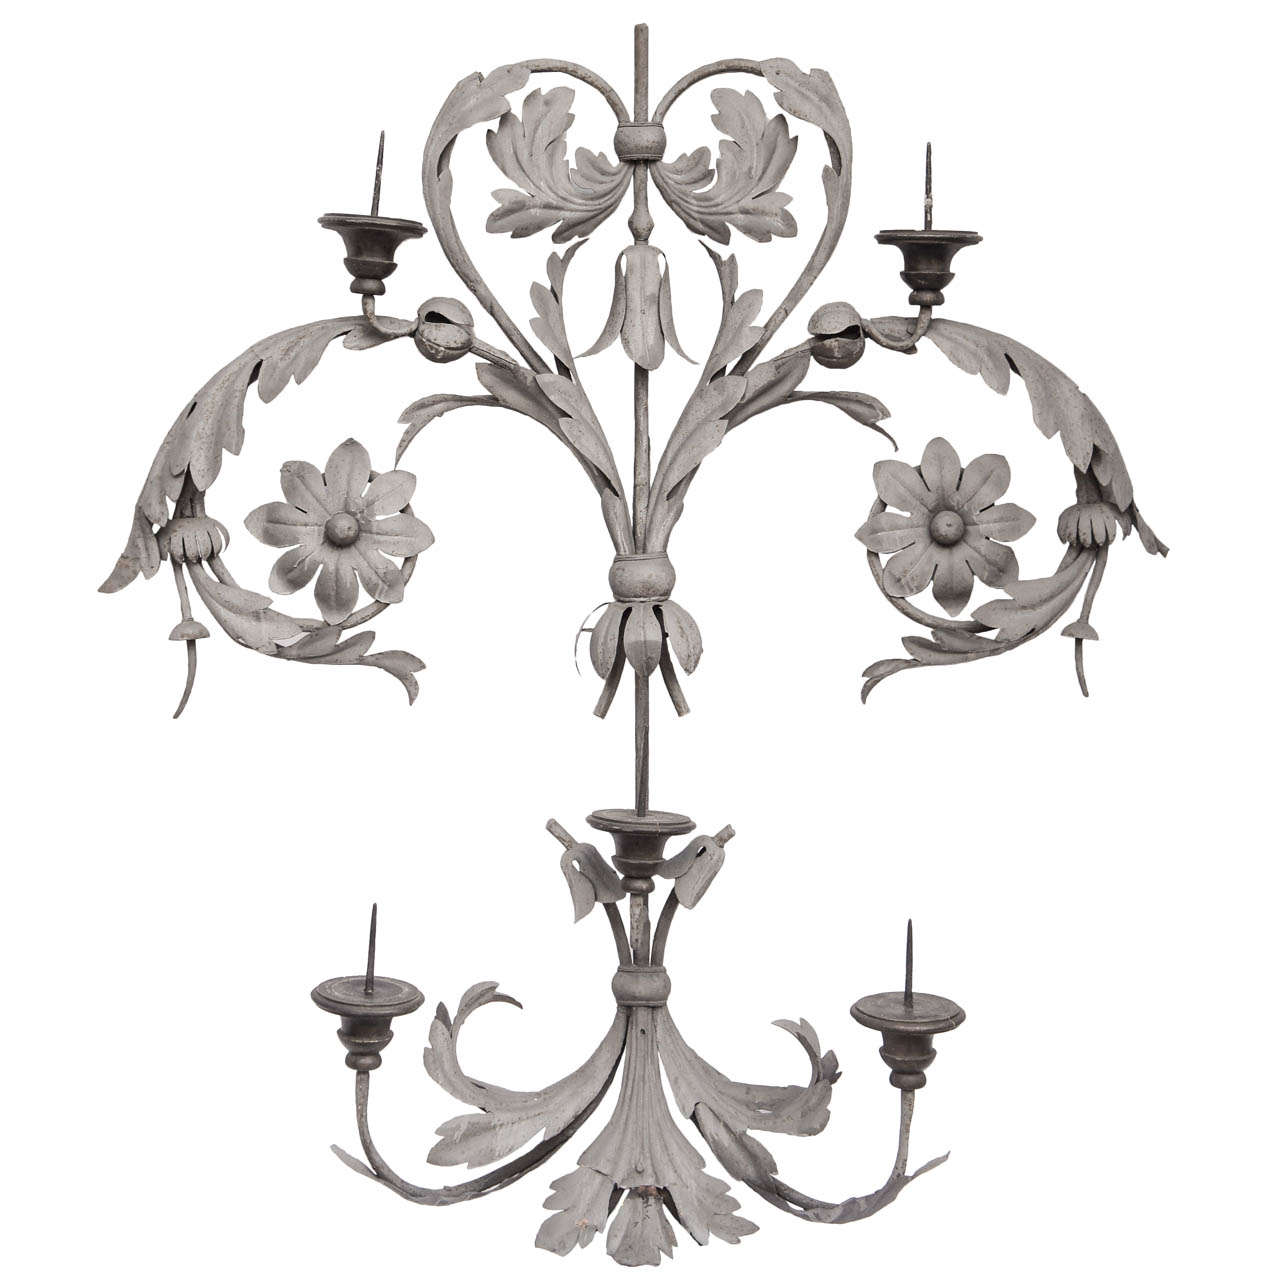 Large Baroque Forged , Wrought Iron & Wood 5 Light Pricket Sconce